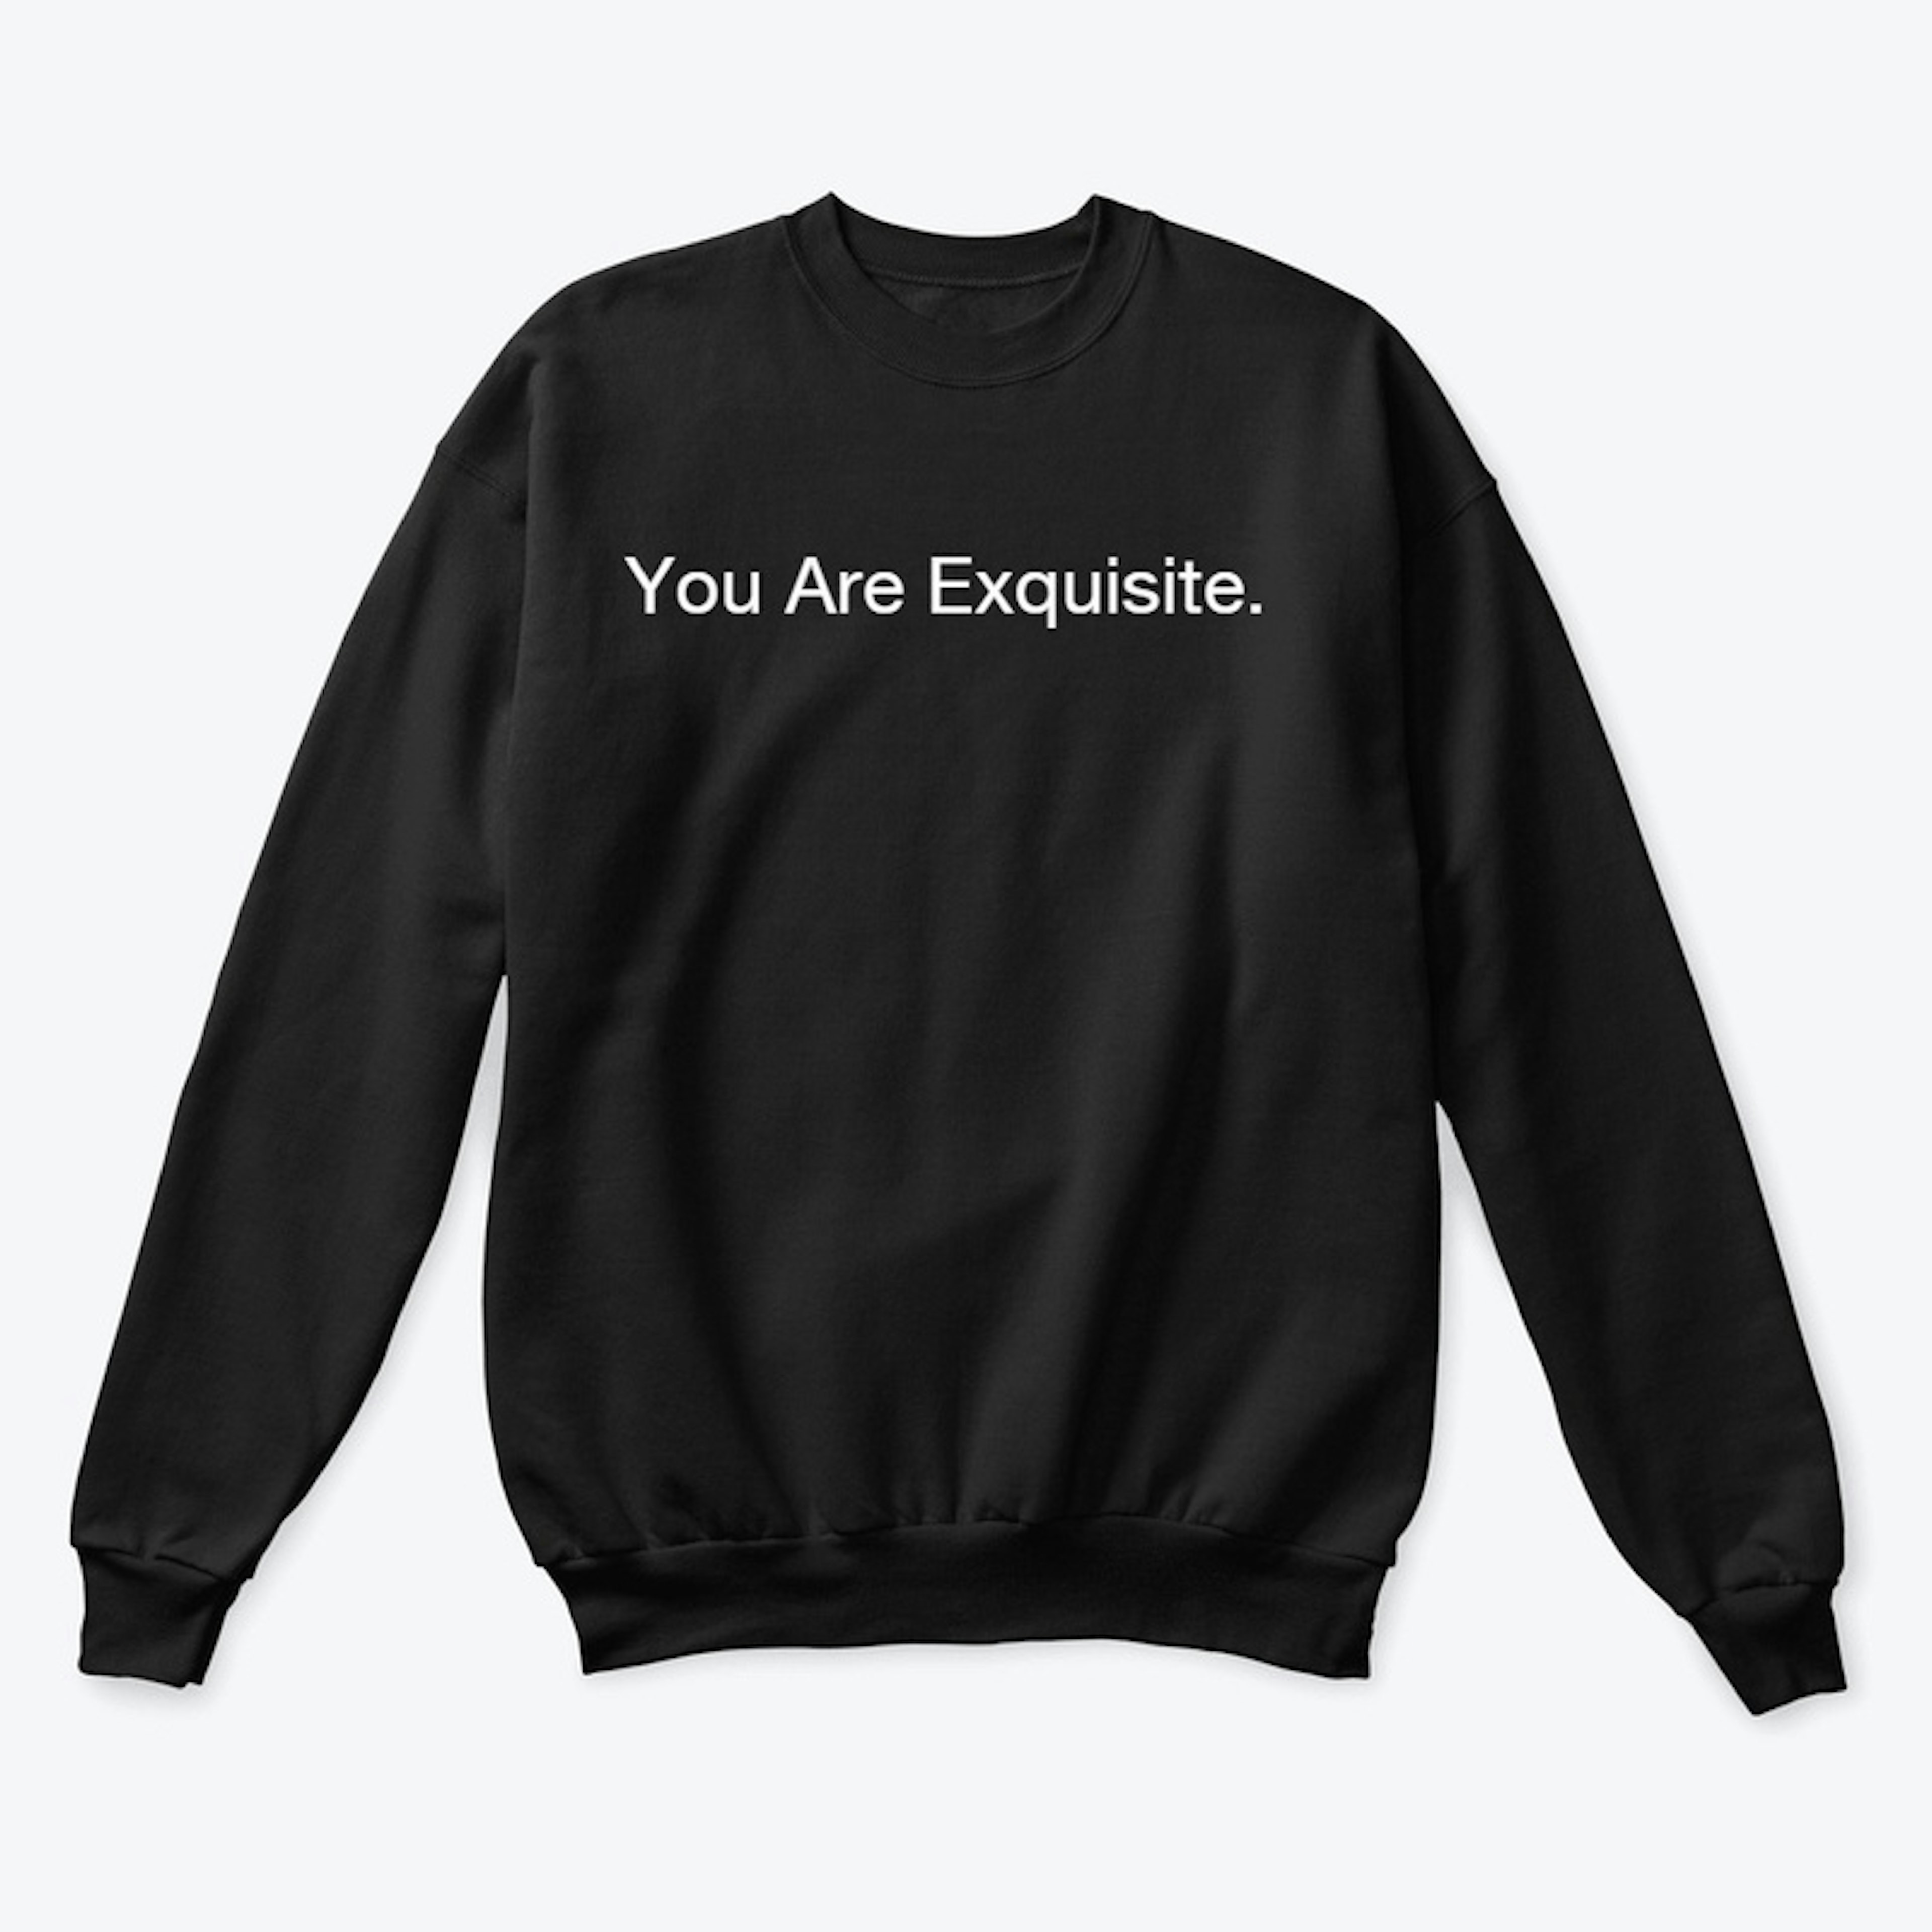 You Are Exquisite. 